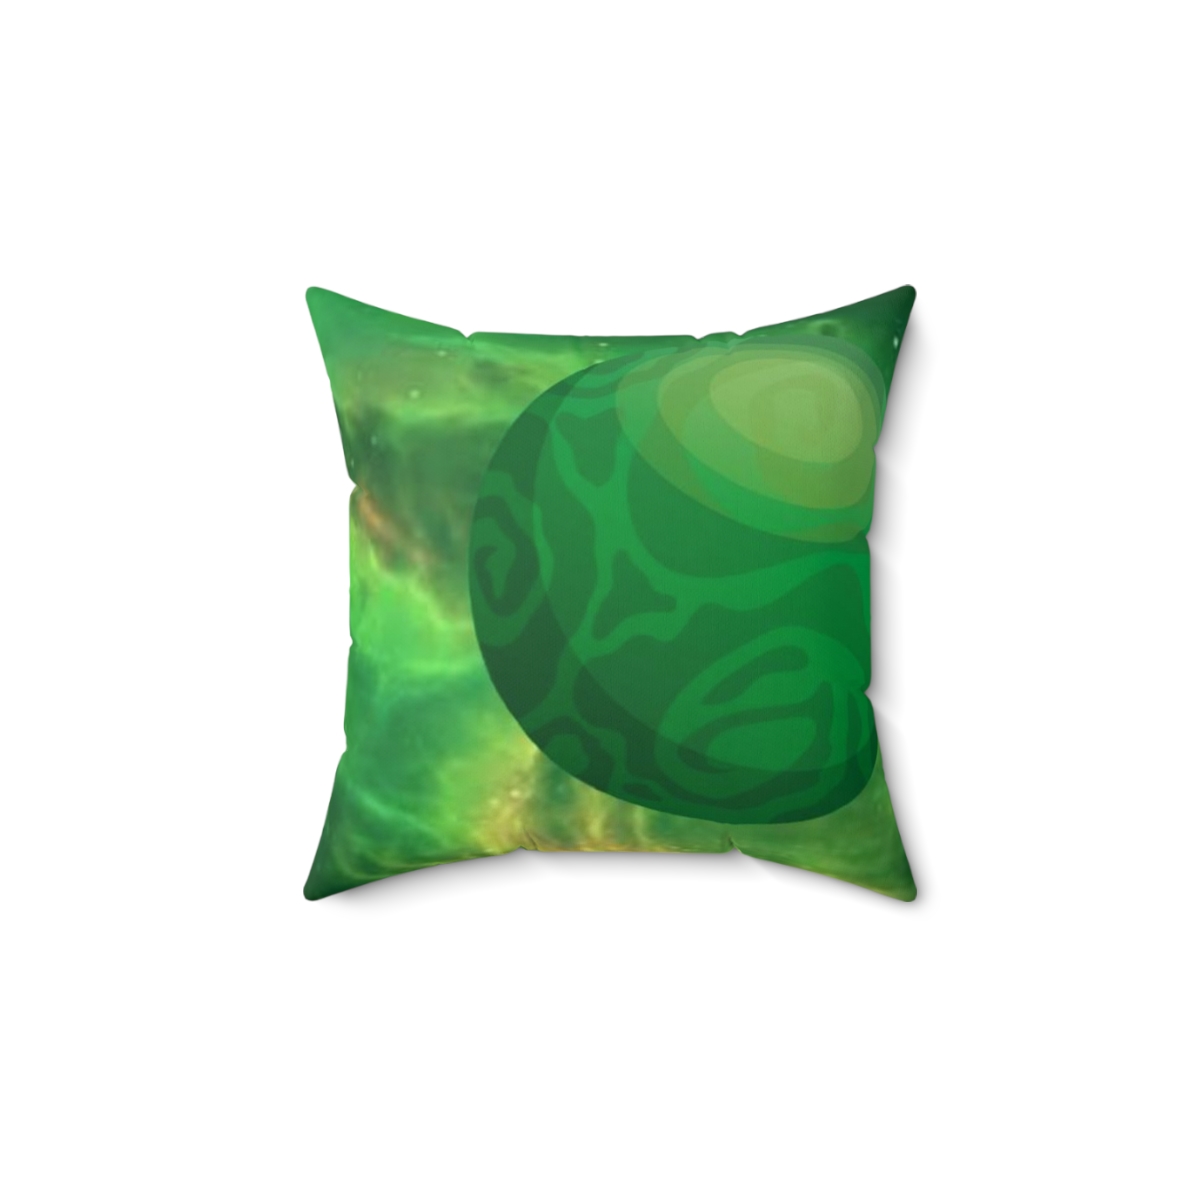 Green Planets Spun Polyester Square Pillow product main image